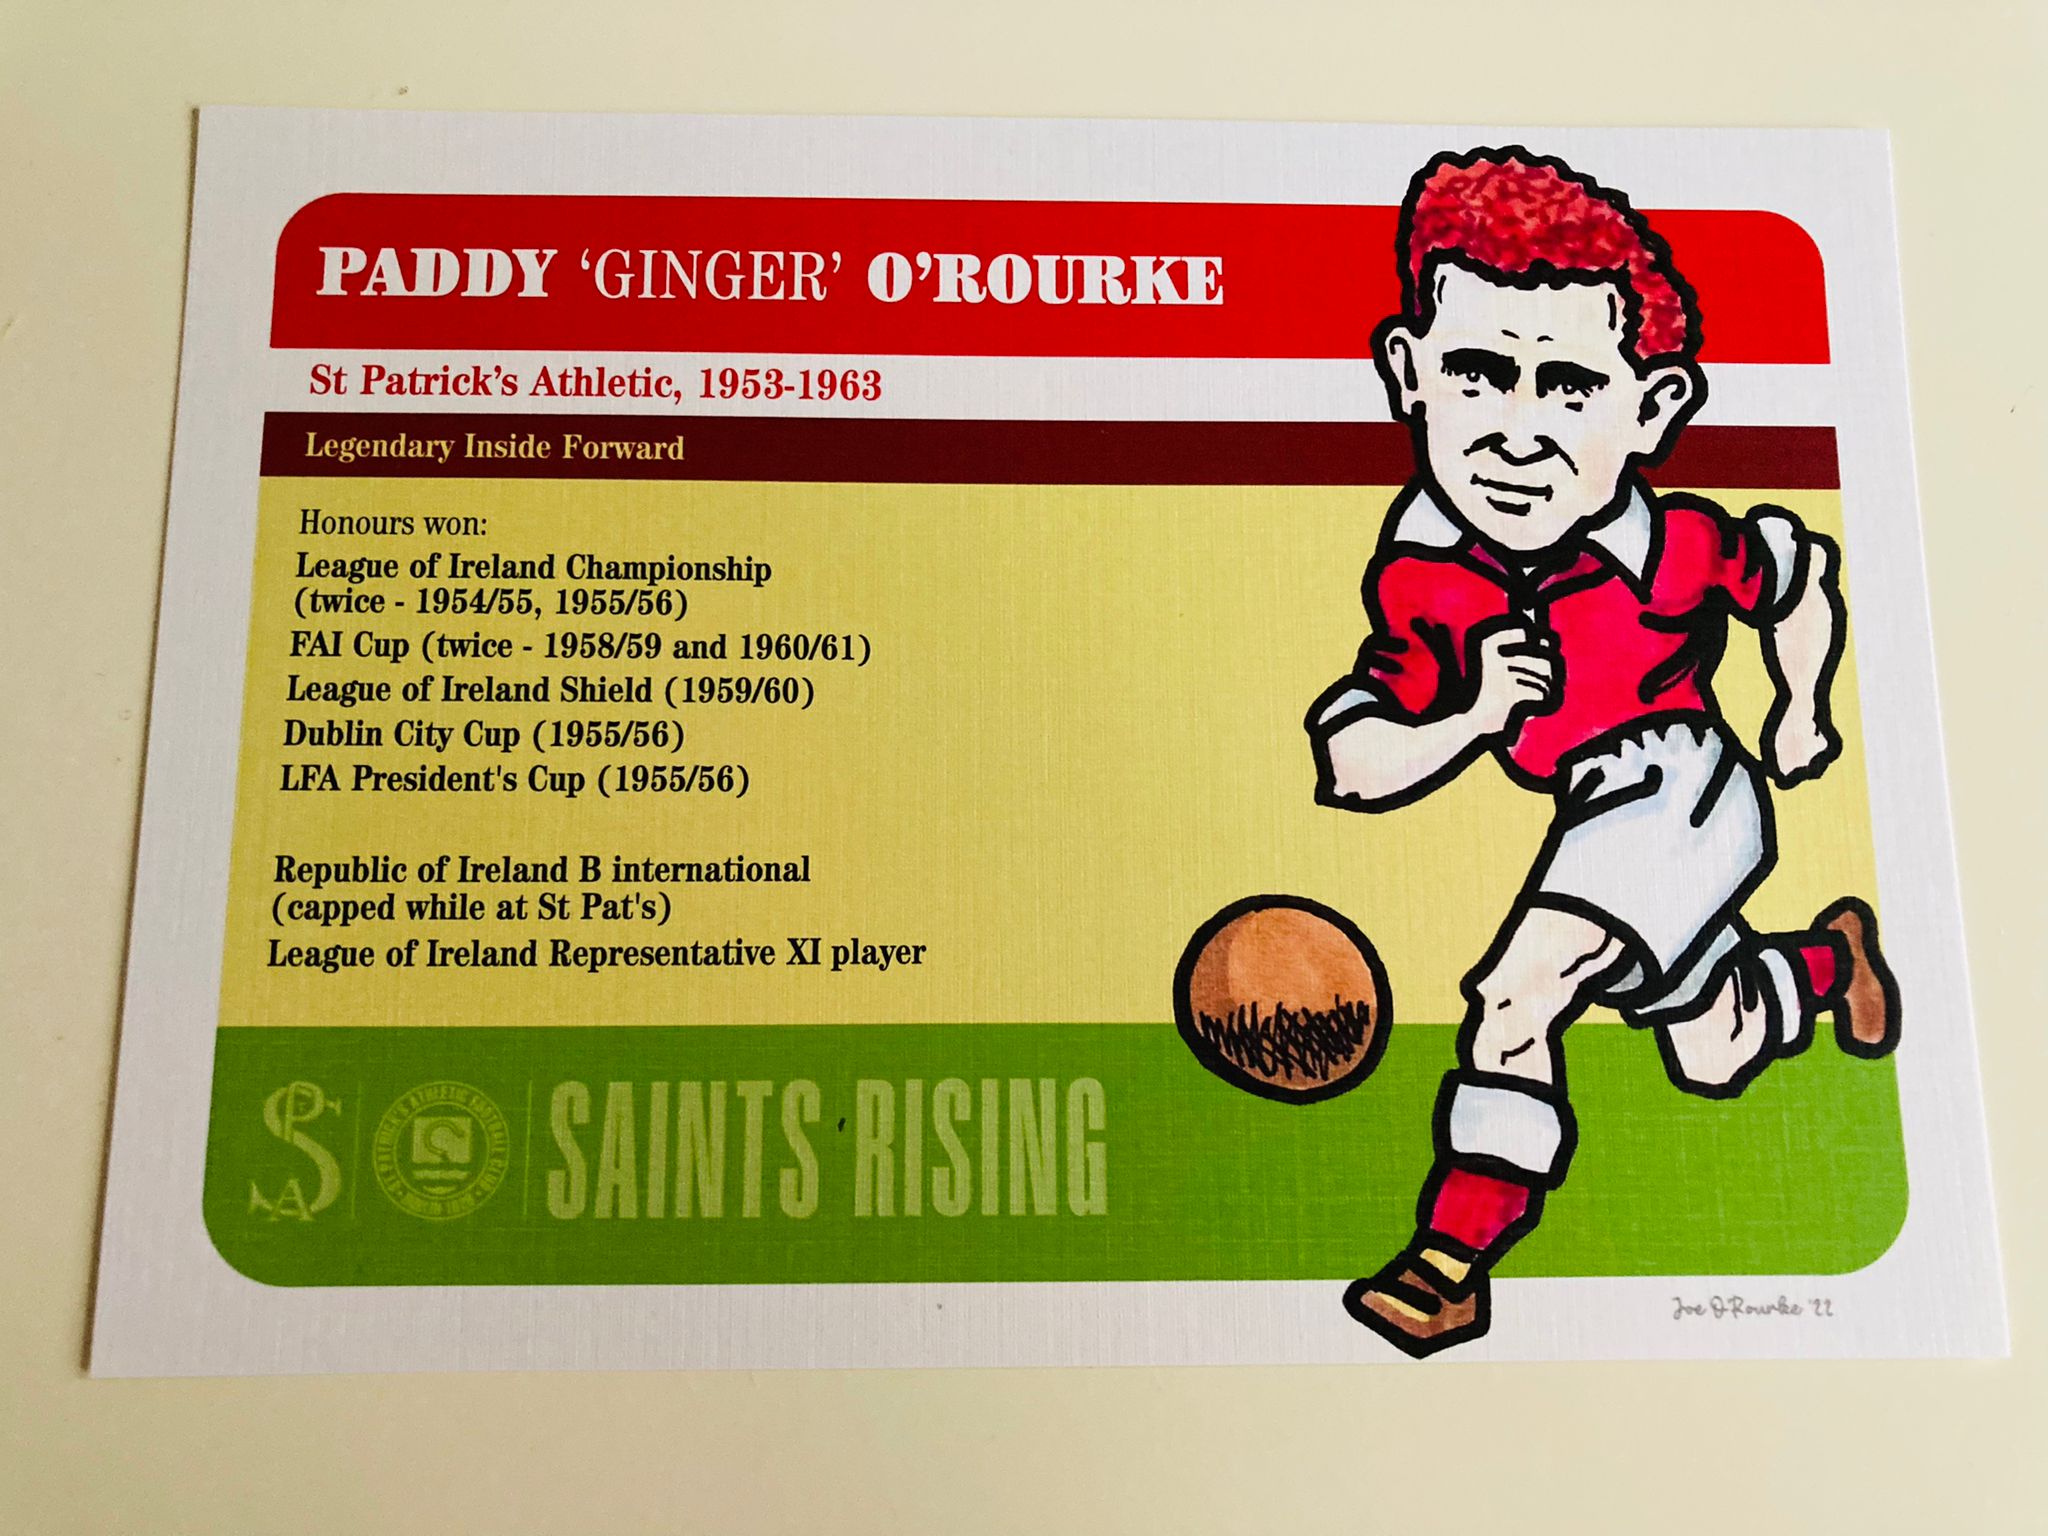 Paddy 'Ginger' O'Rourke - Limited Edition Saints Rising Art Prints